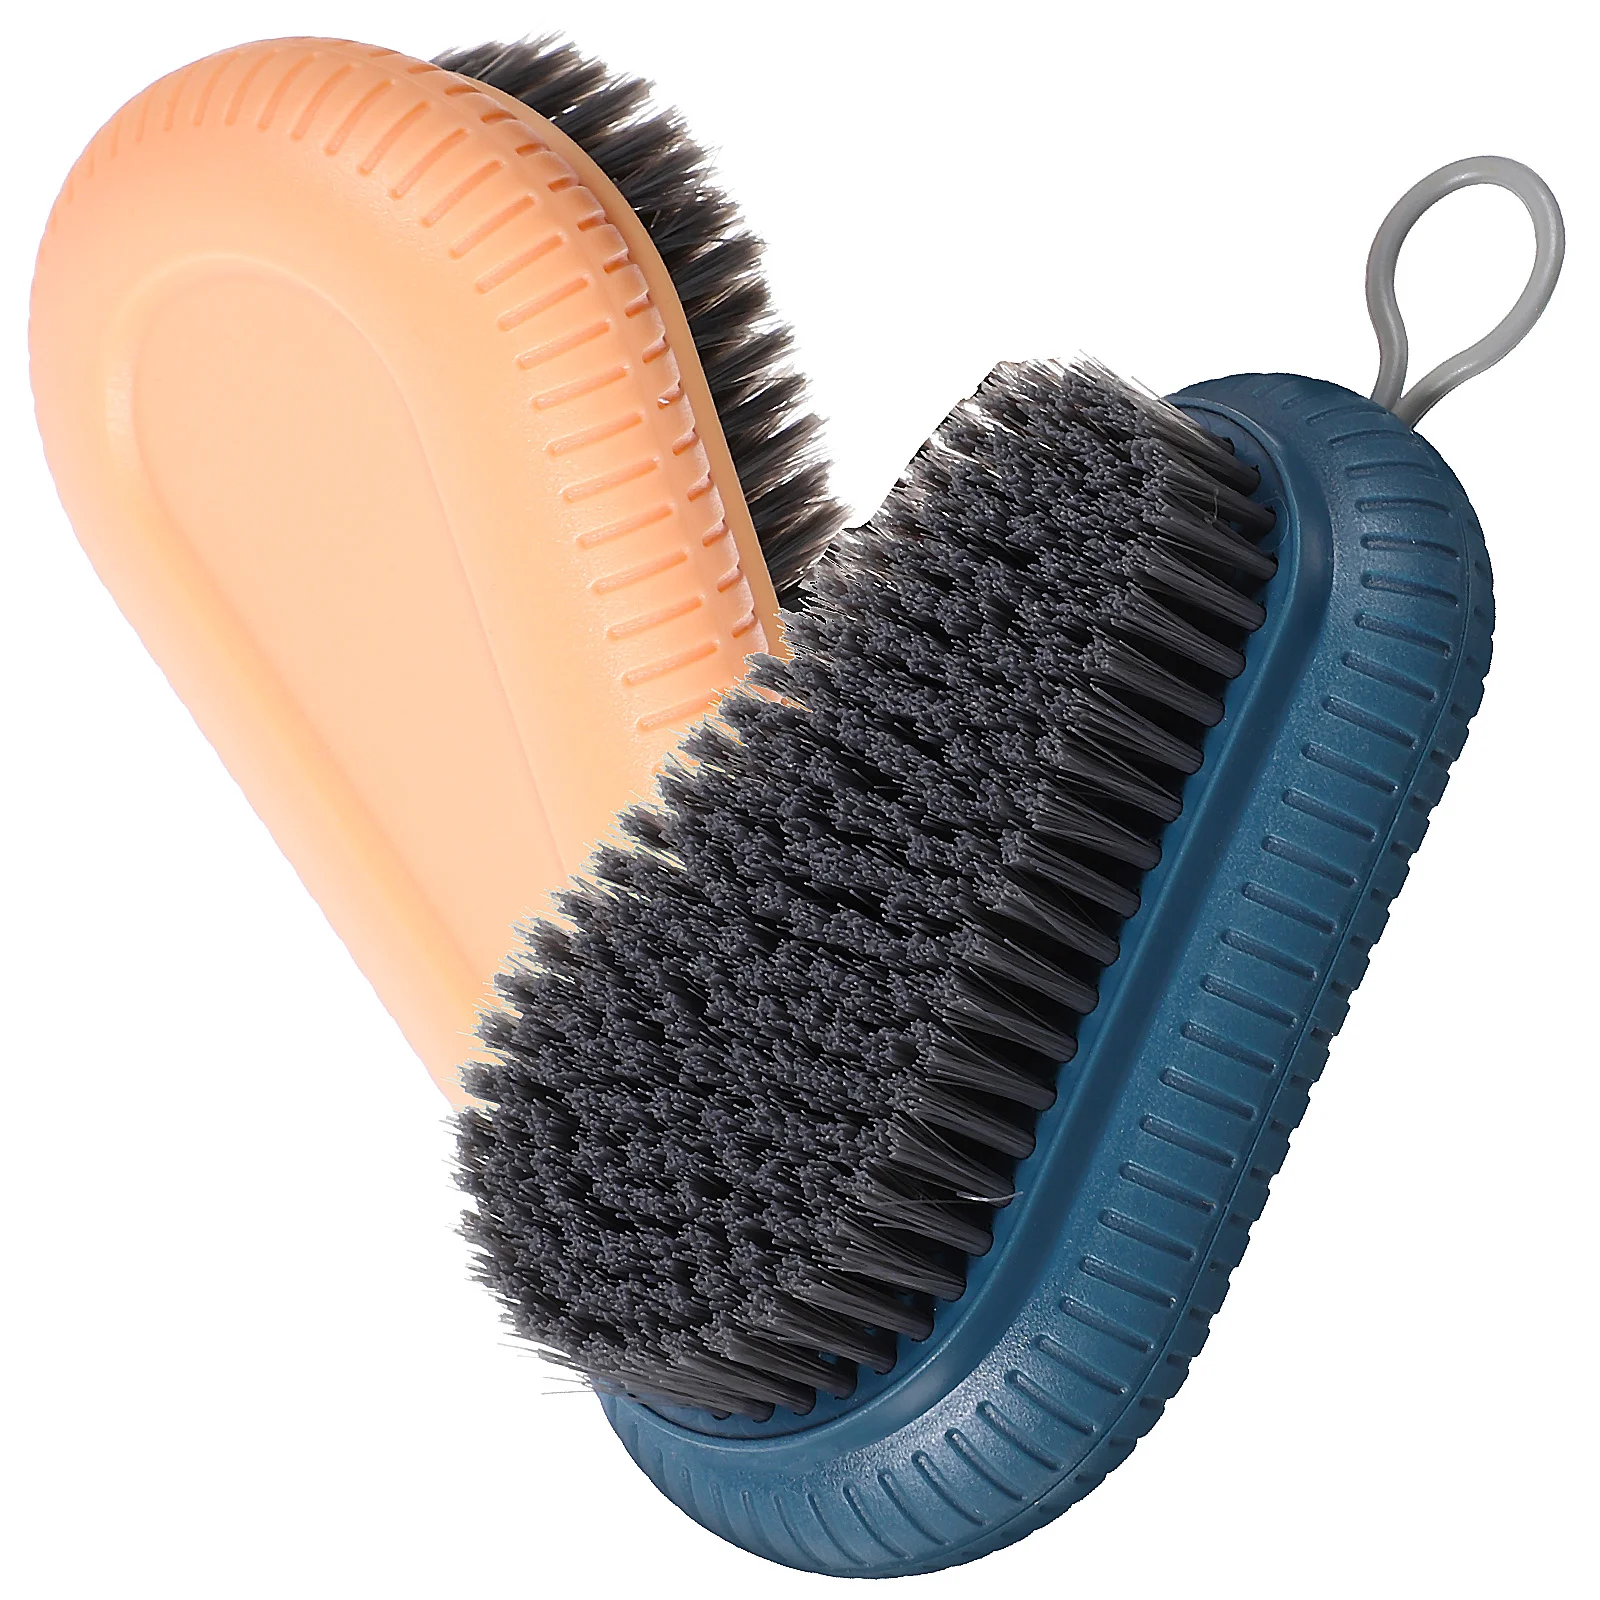 

2 Pcs Cleaning Brushes Plastic Soft Hair Laundry Soft Cleaning Brush Household Shoe Scrubbing Scrubber Stains